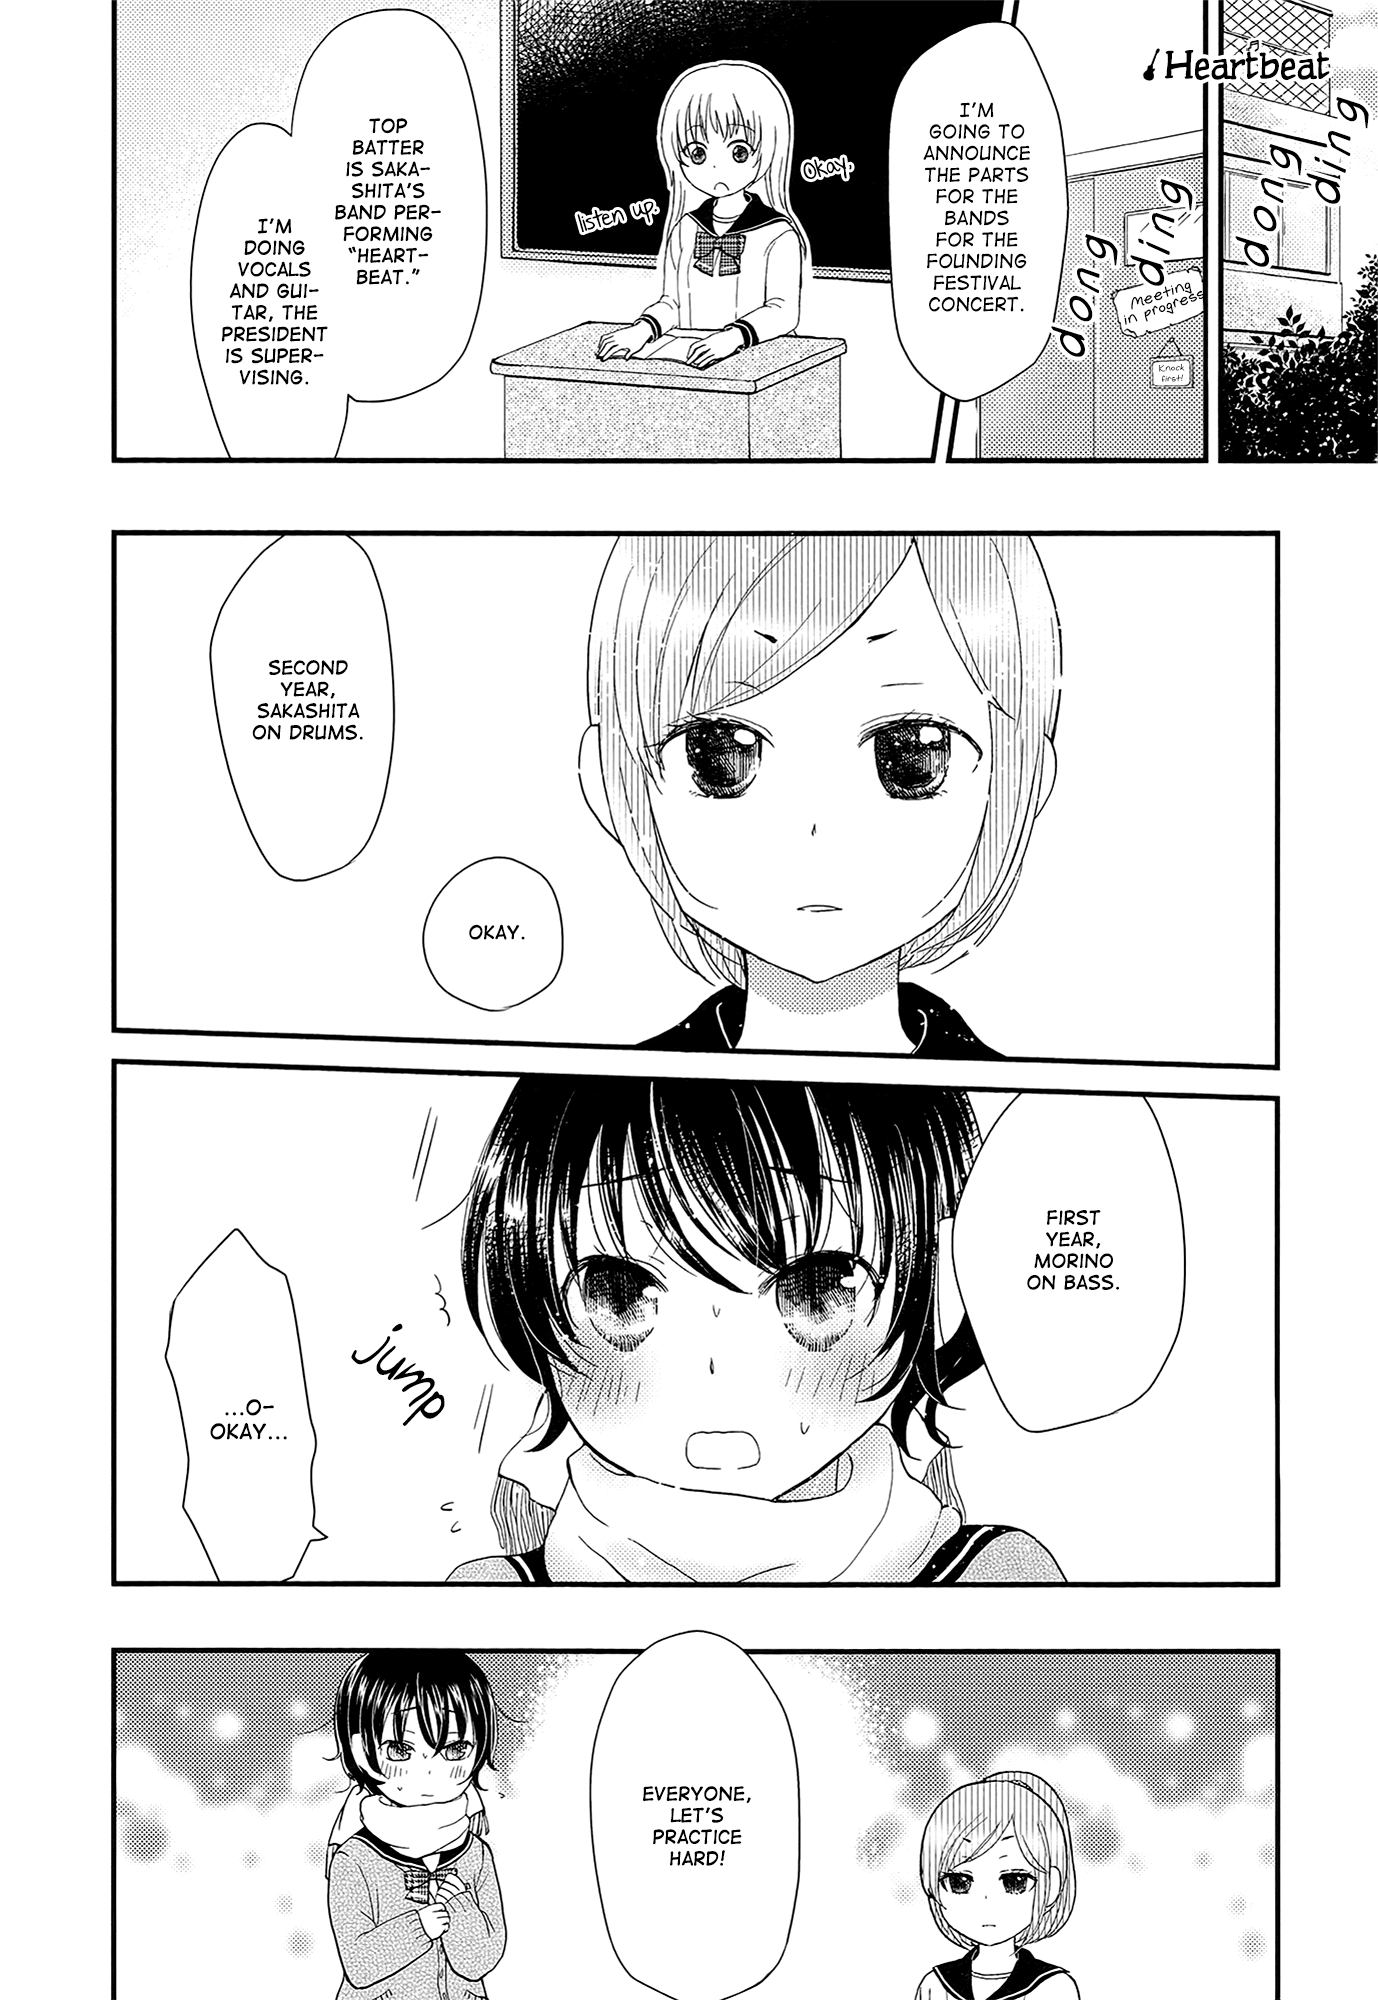 A Cold And After That - Page 1